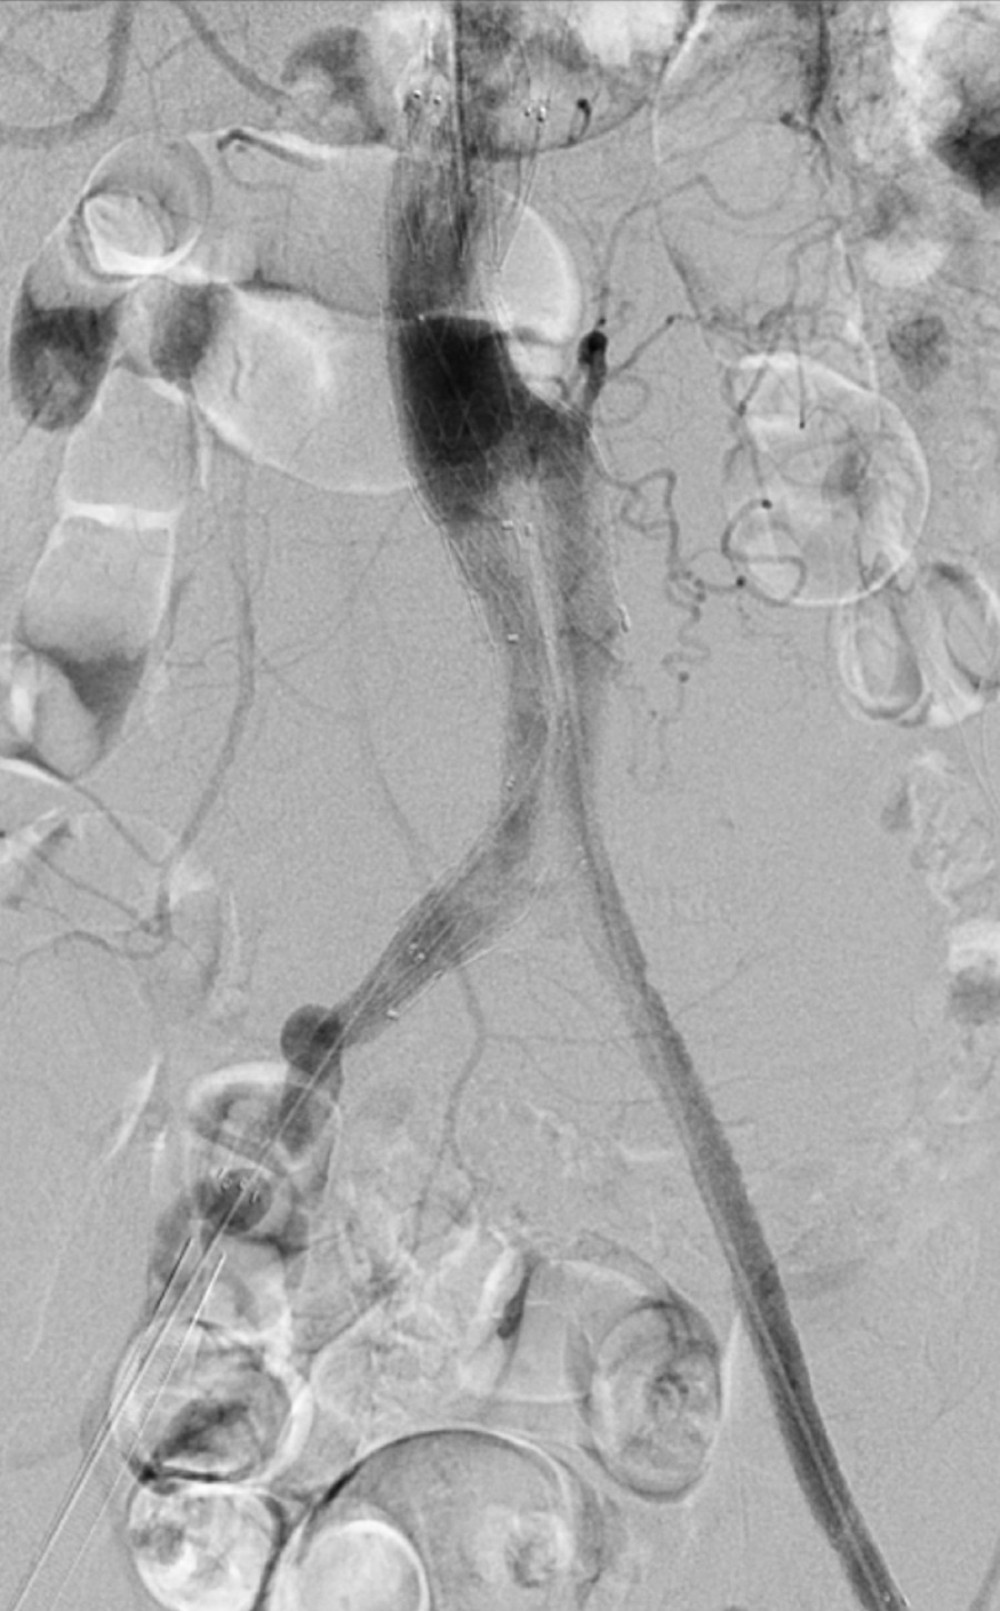 Intraoperative angiography image obtained during endovascular aortic aneurysm repair. Angiography image obtained after endovascular aortic aneurysm repair shows no endoleak.